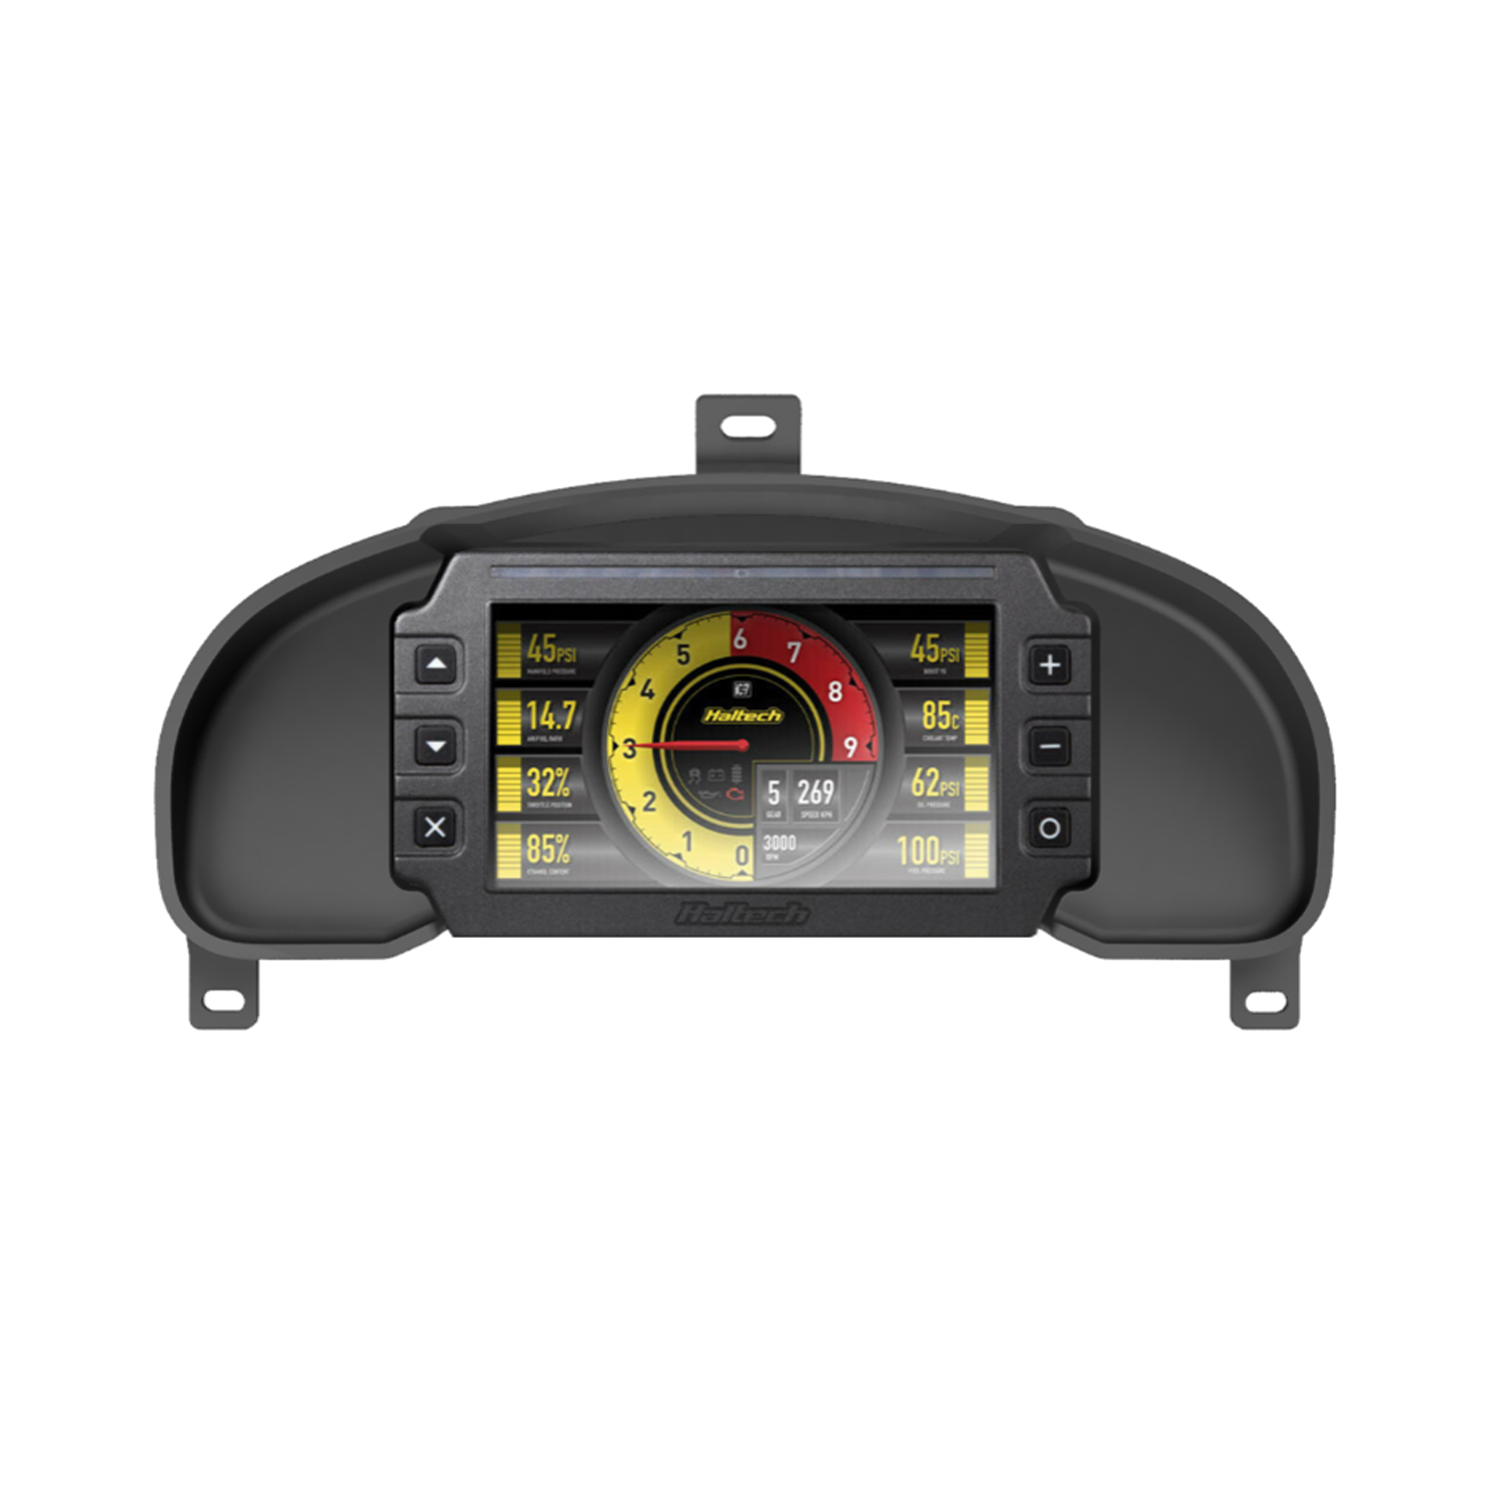 Nissan Silvia S15 200SX Dash Mount Recessed for the Haltech iC-7 Display (display not included)